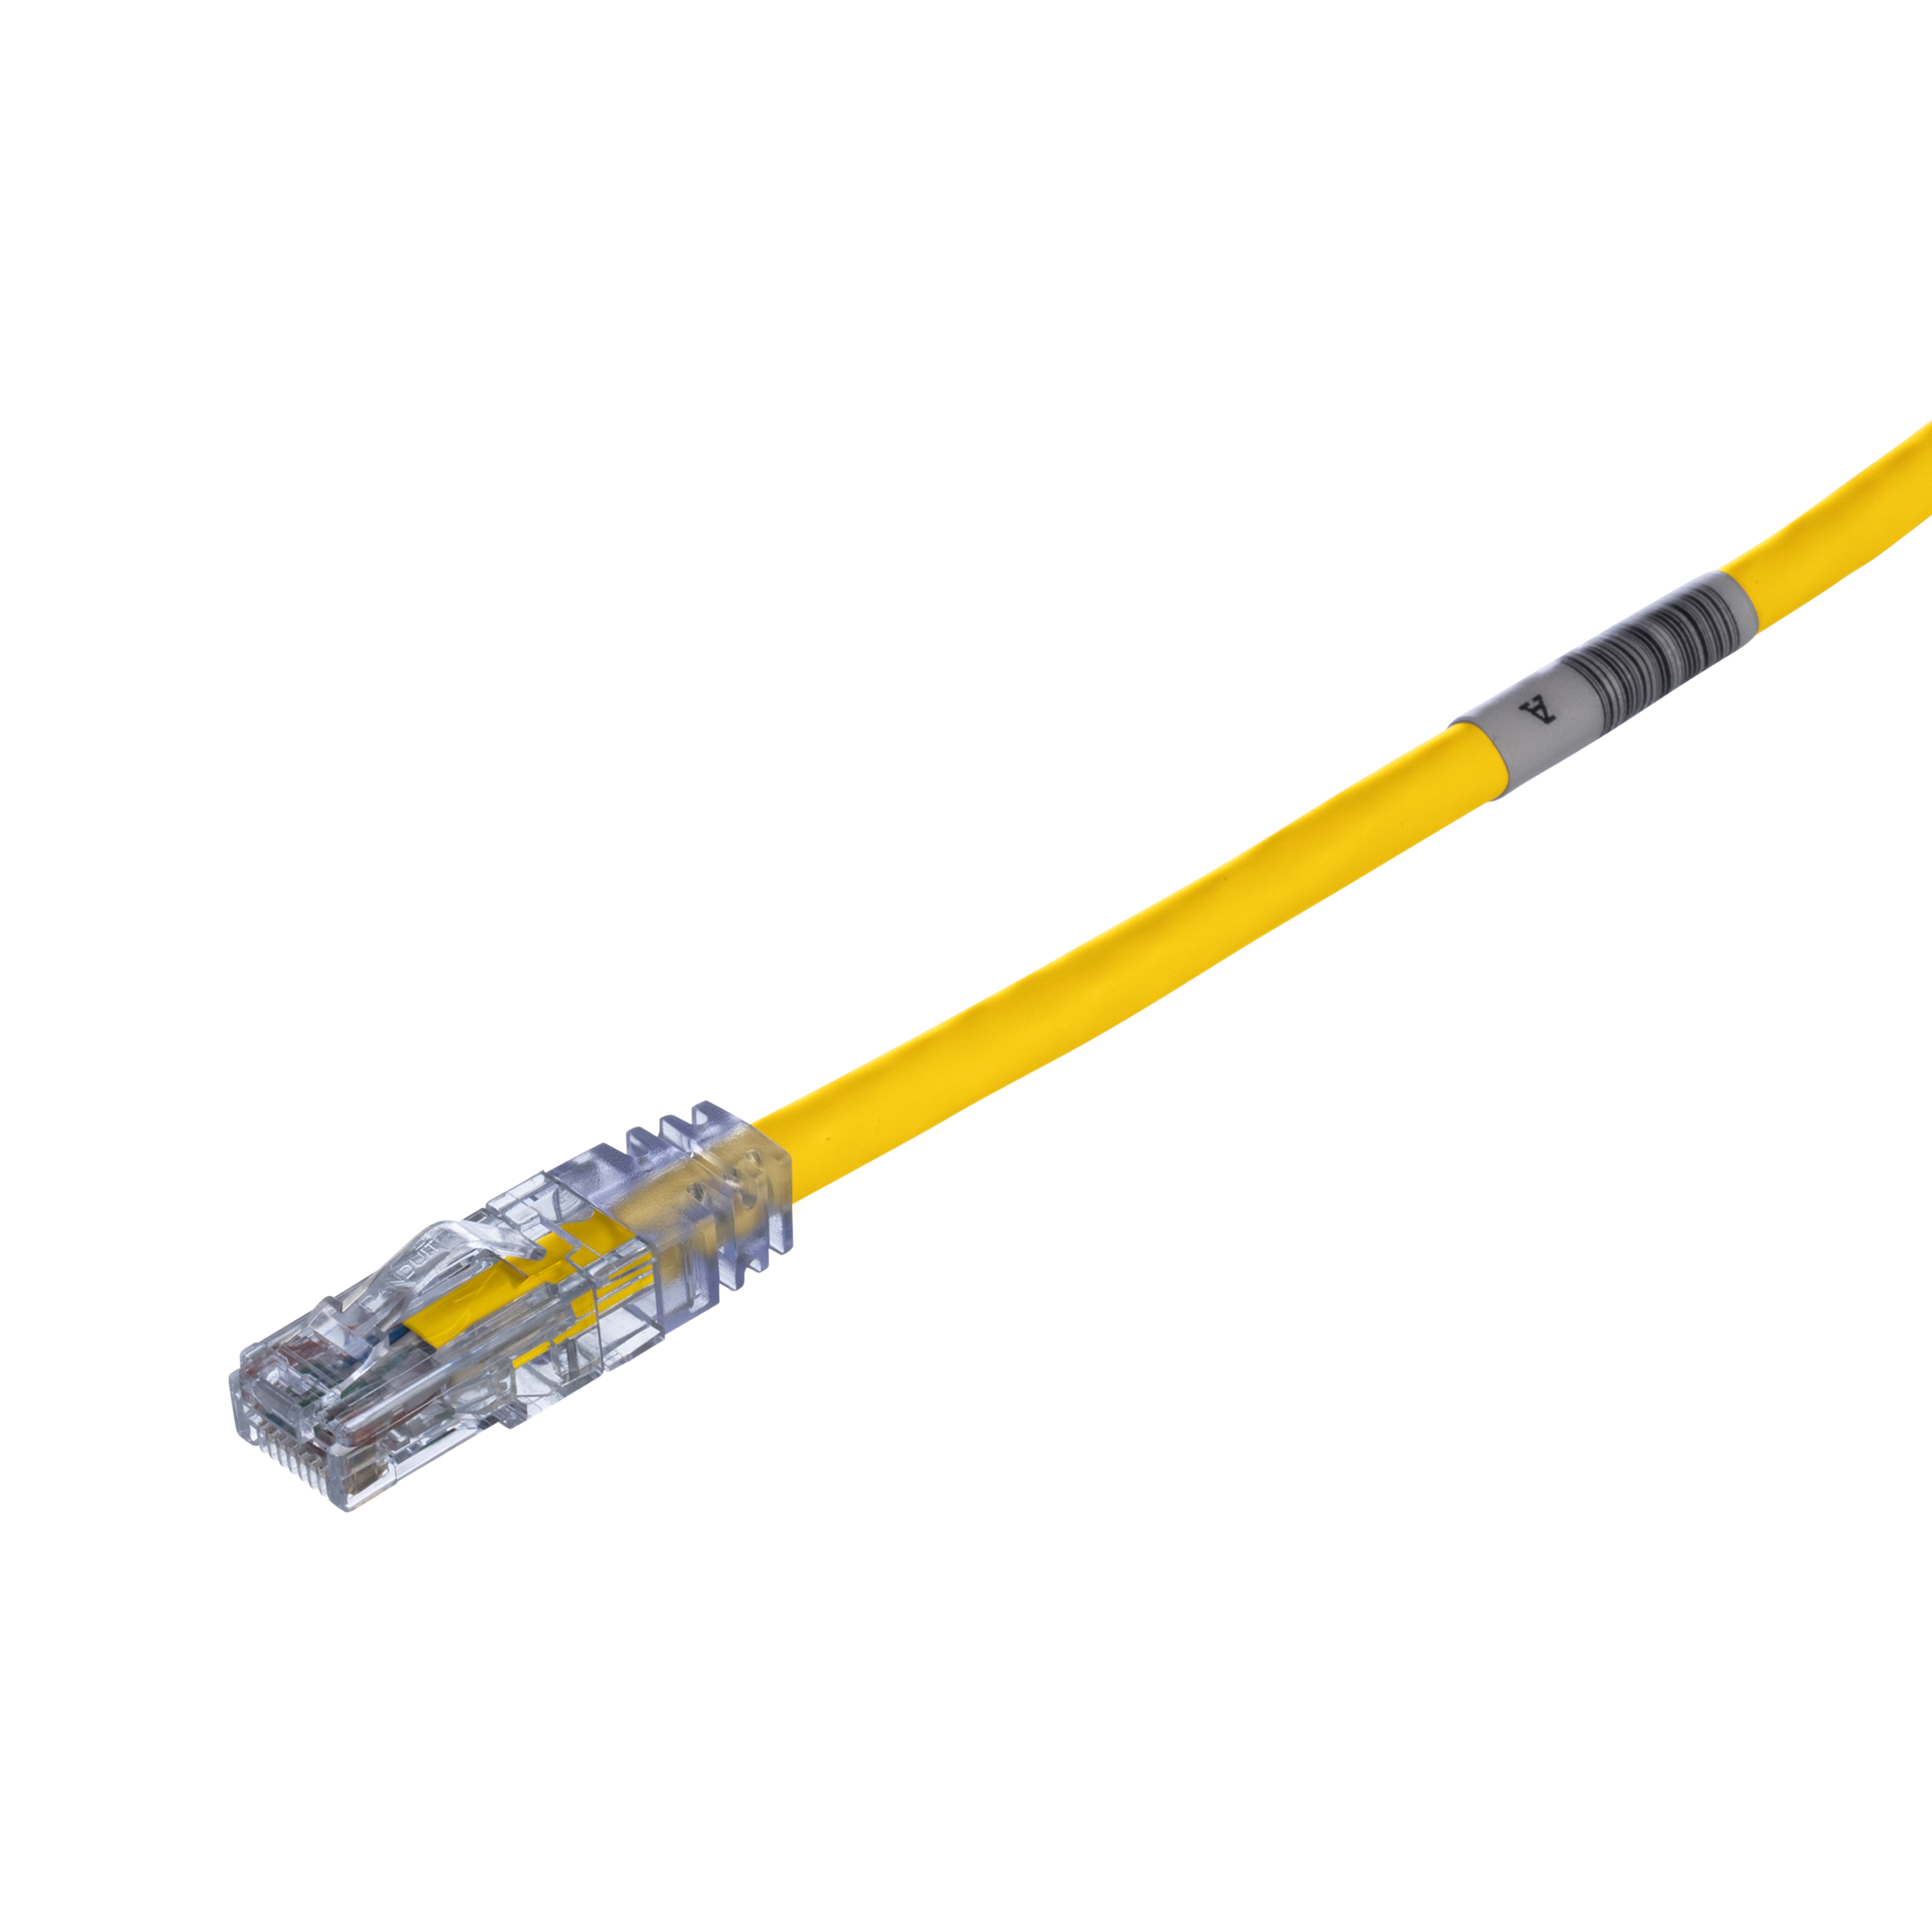 Cat 6 24 AWG UTP Copper Patch Cord, 1 ft, Yellow